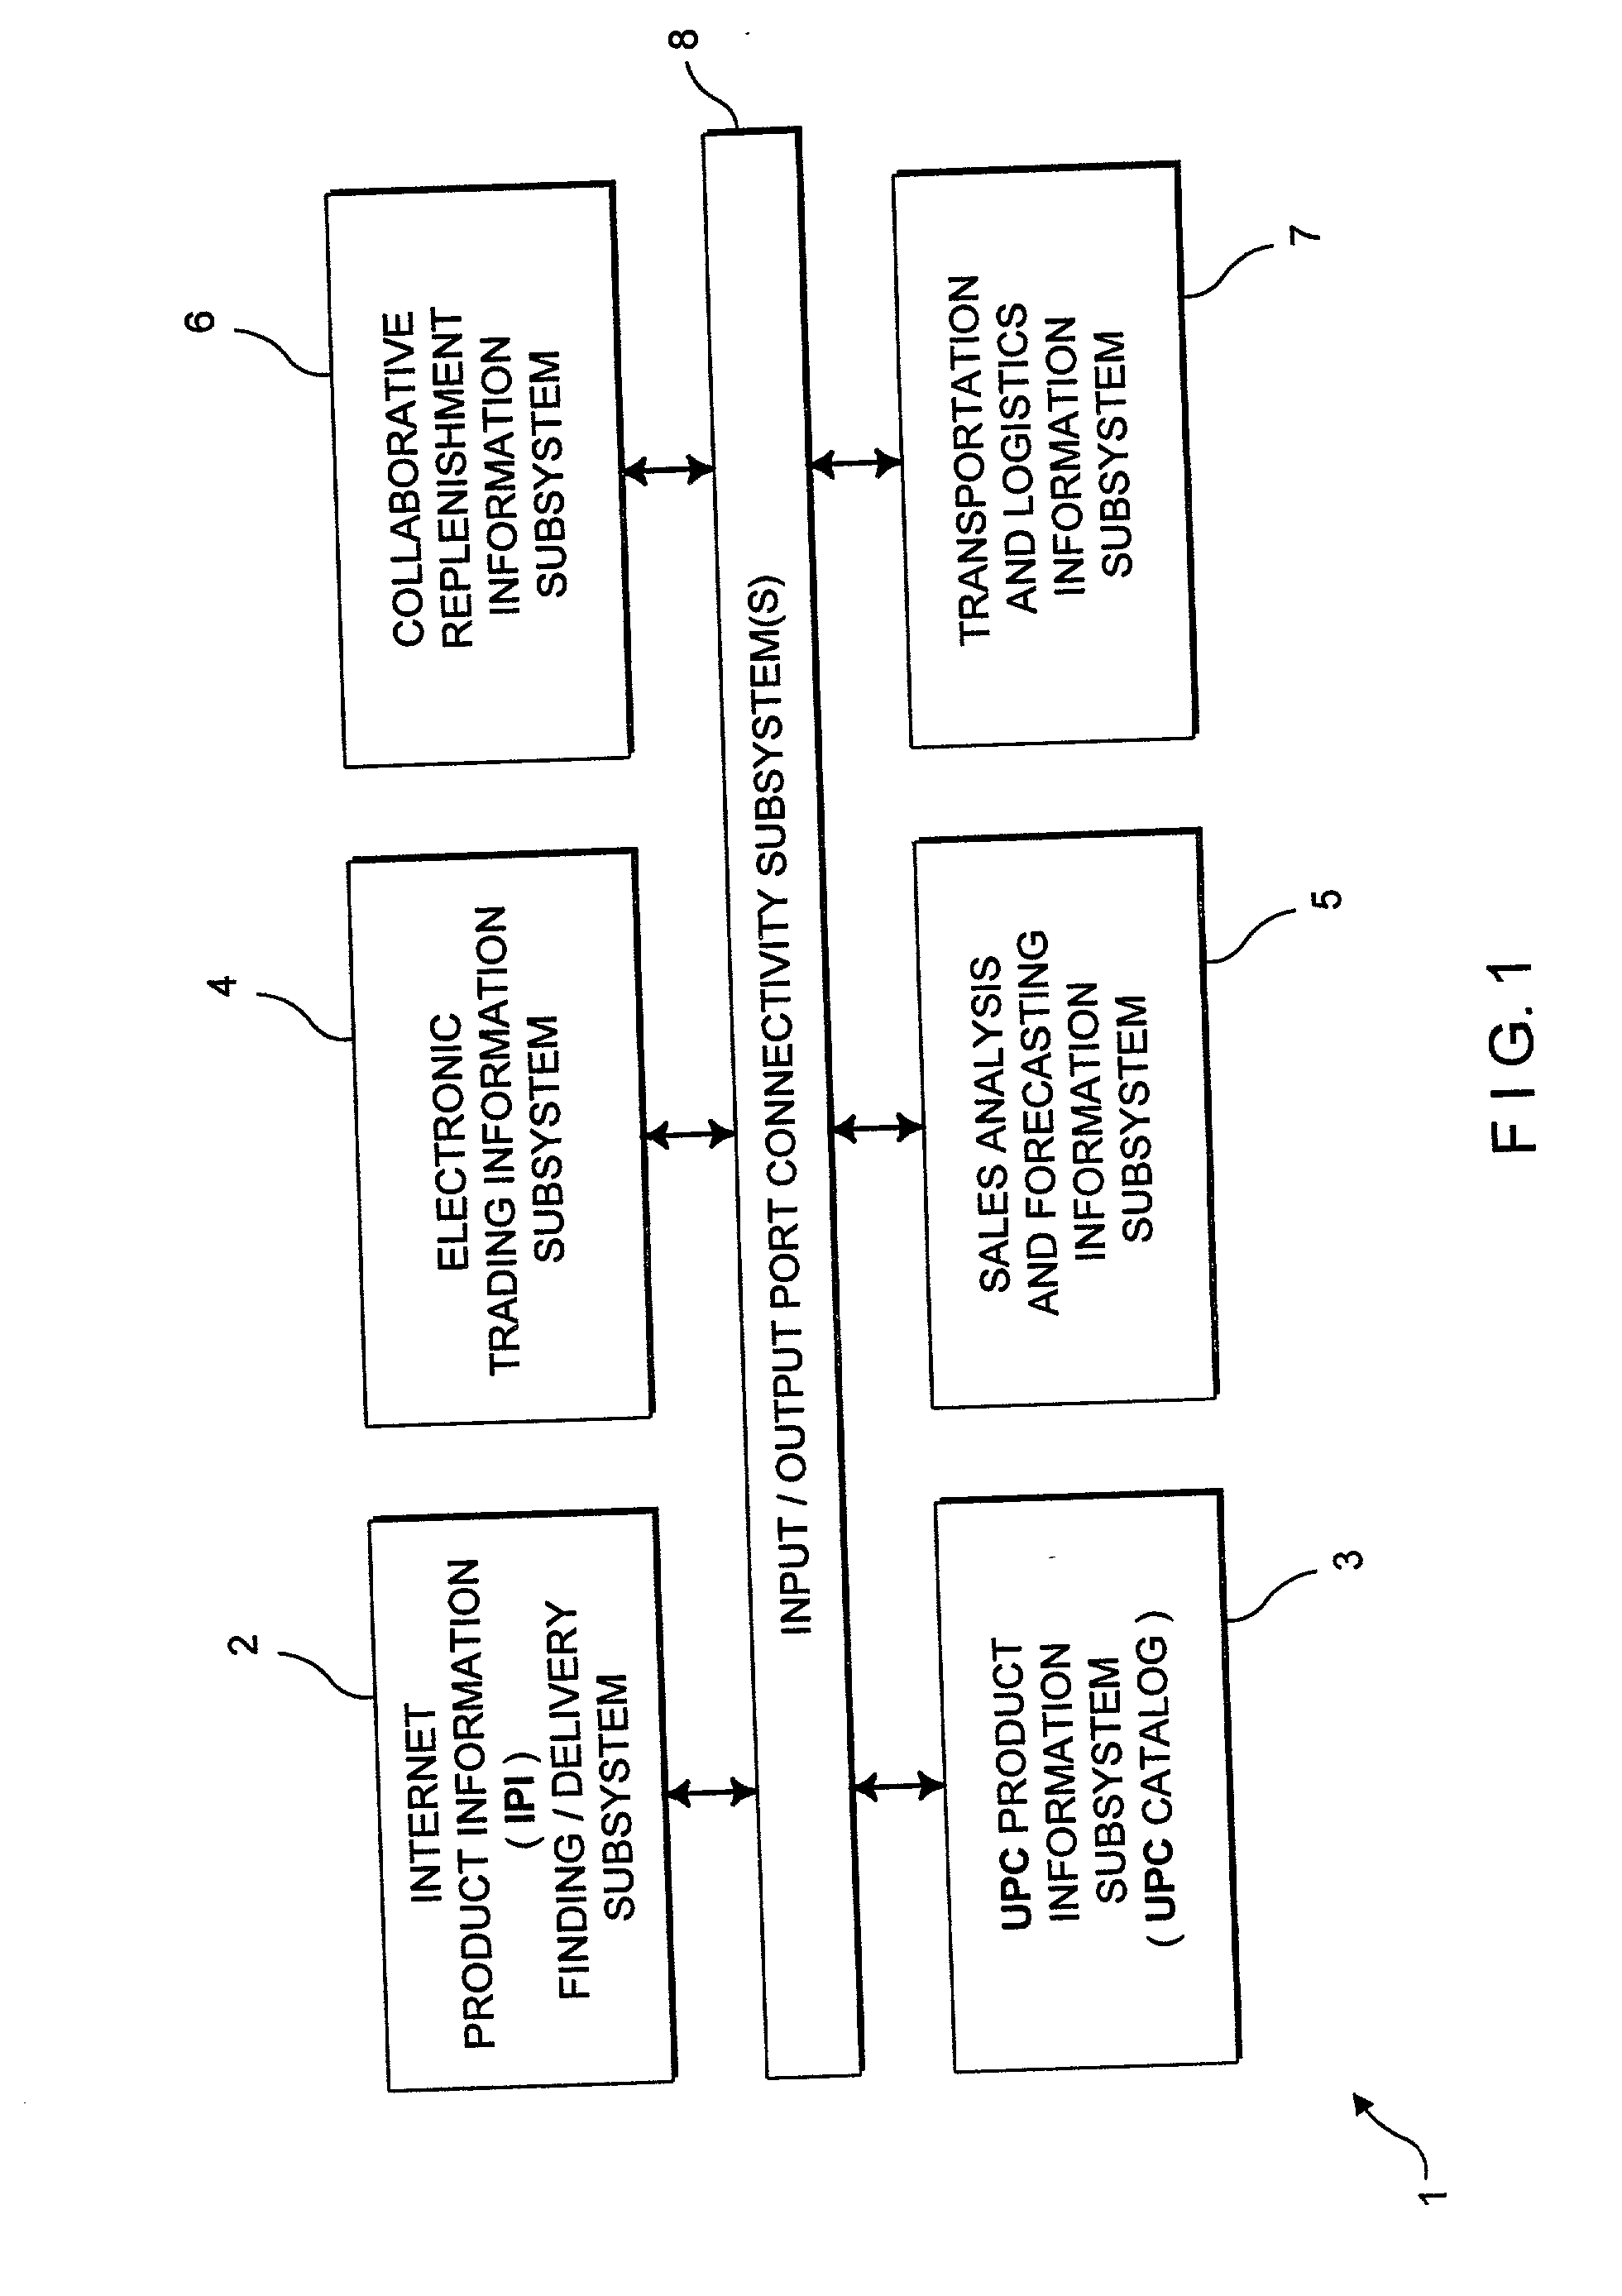 System and method for delivering consumer product related information to consumers within retail environments using internet-based information servers and sales agents